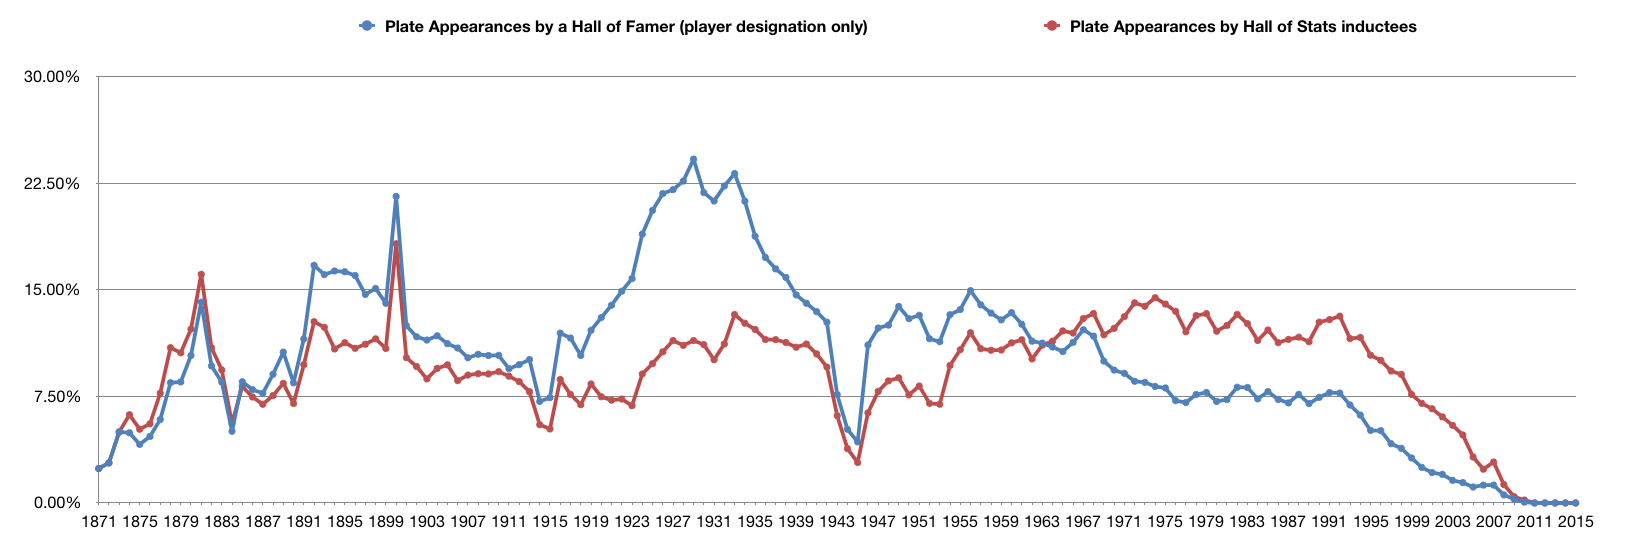 Percentage of Plate Appearances made by a Hall of Famer and a Hall of Stats member